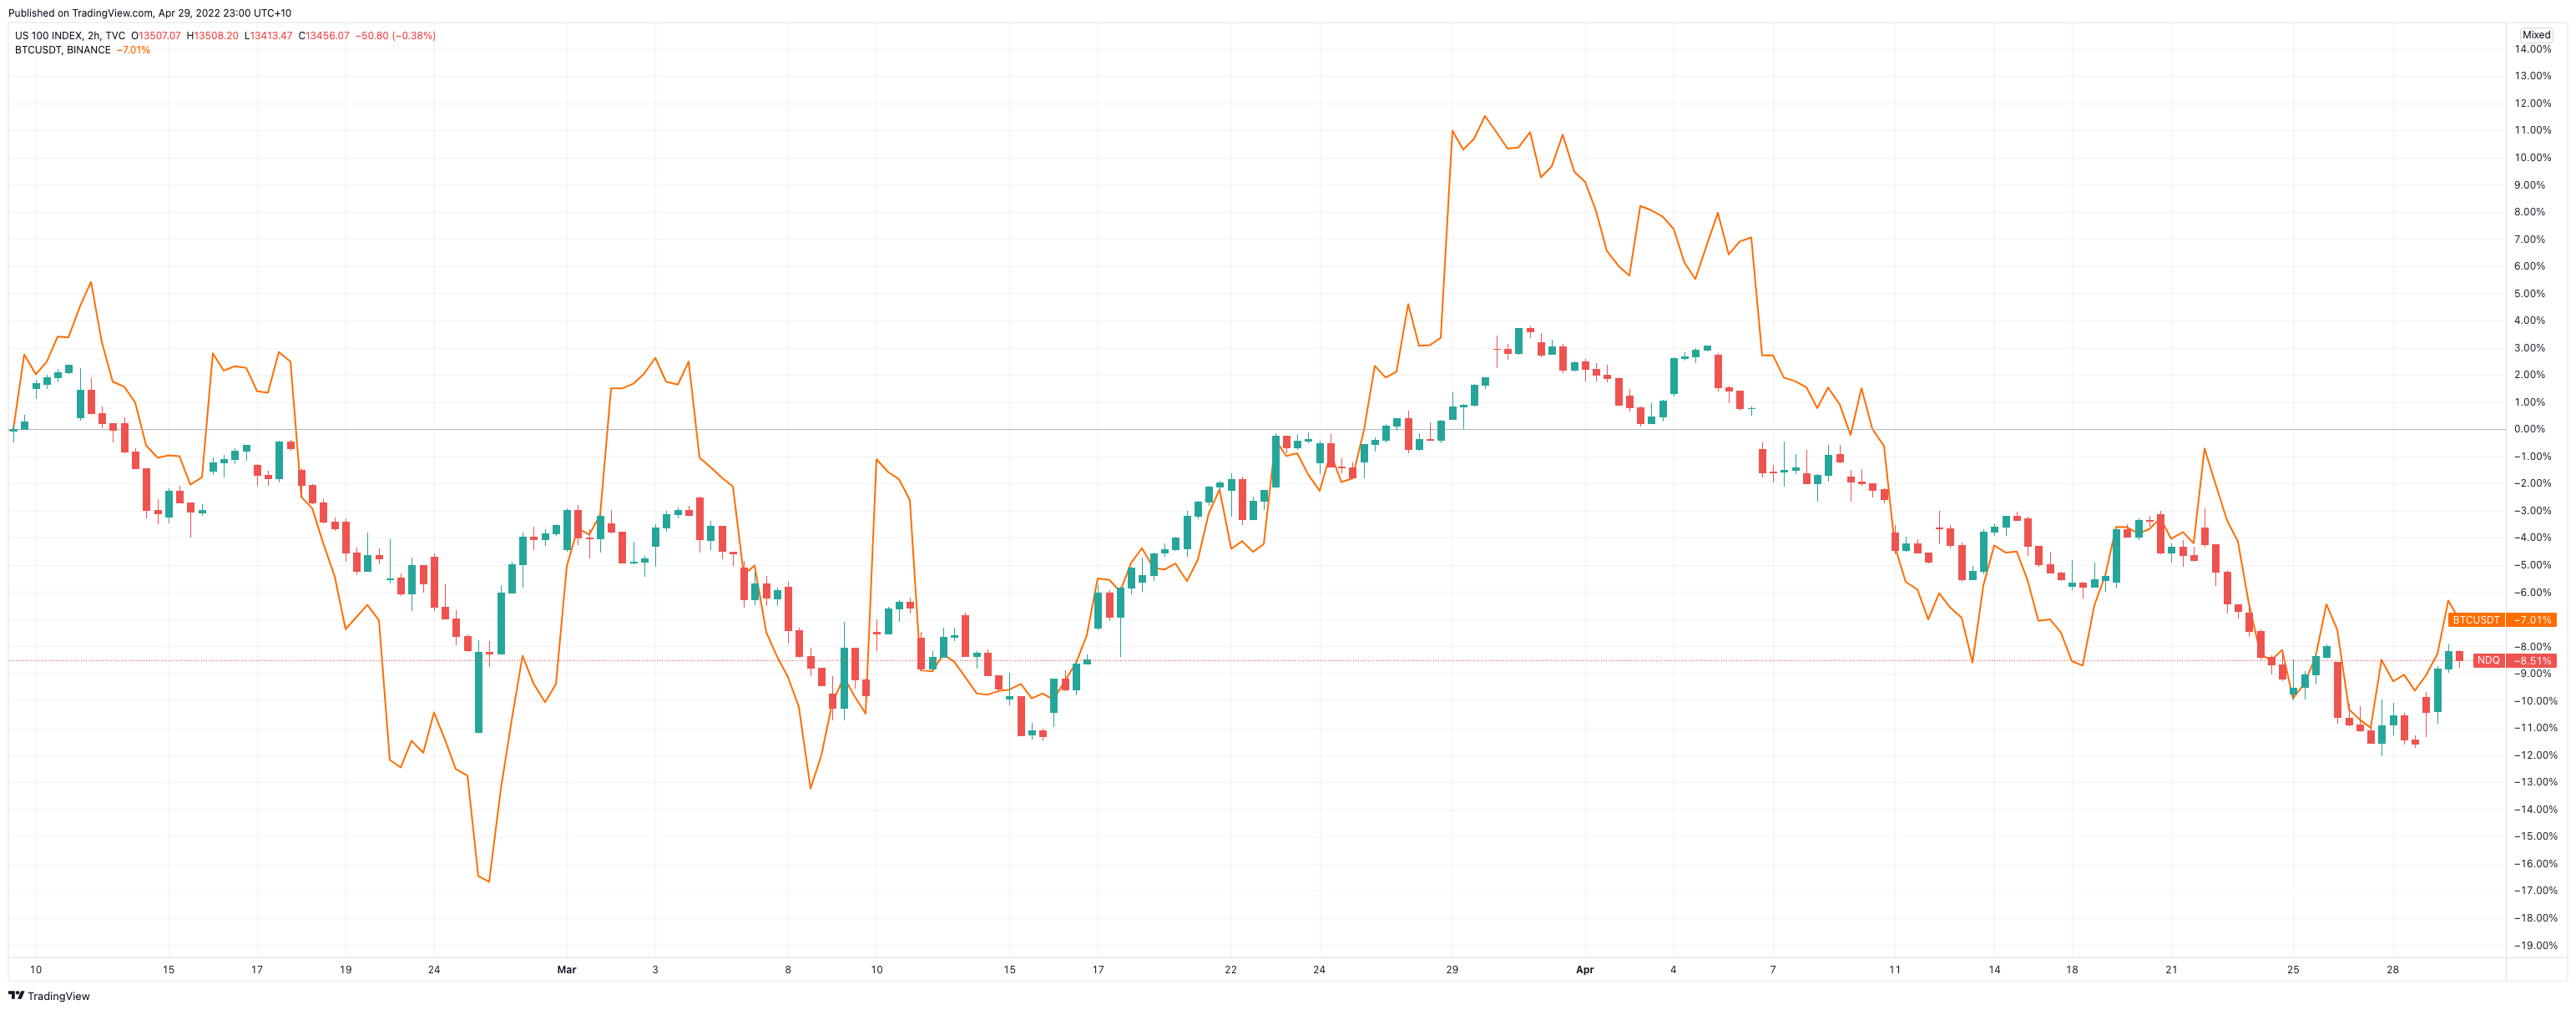 Price action of Bitcoin & Nasdaq over the last two and a half months